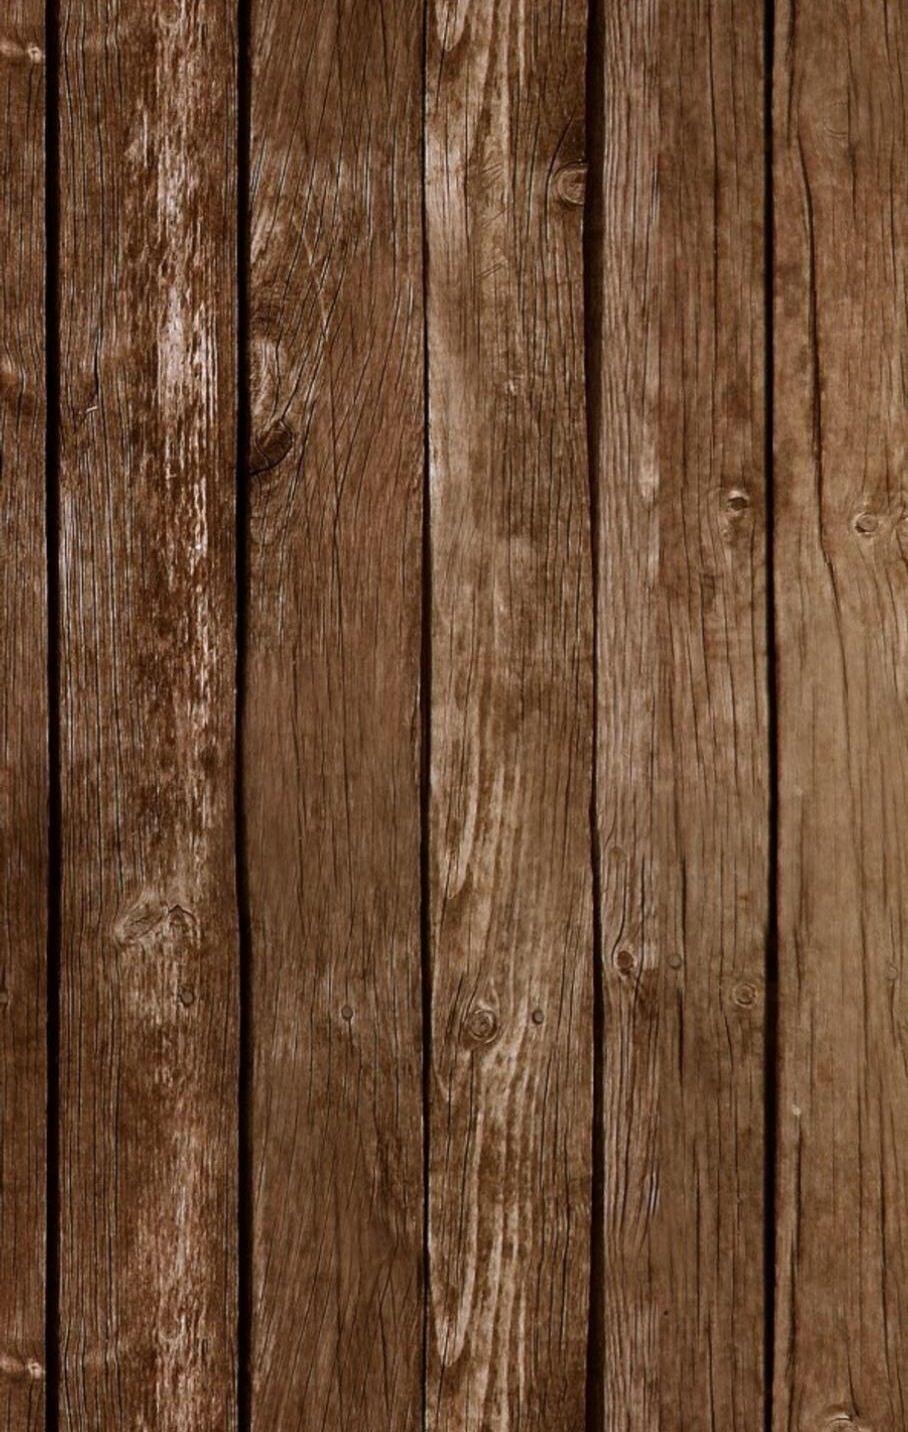  Wood  iPhone  Wallpapers  Top Free Wood  iPhone  Backgrounds  